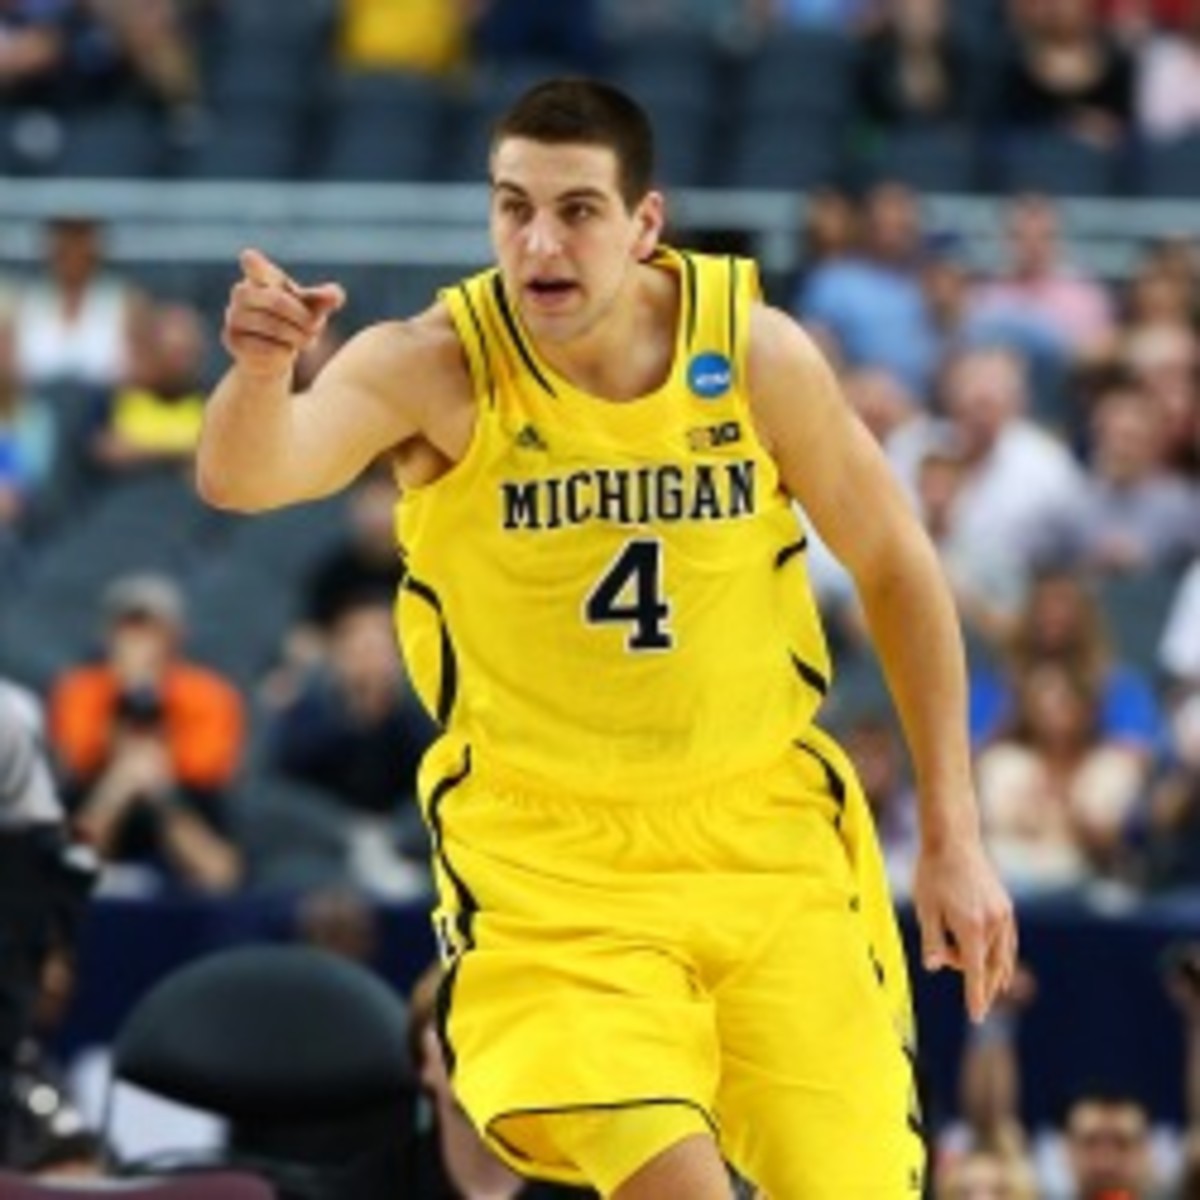 Michigan forward Mitch McGary says he is returning for his sophomore season. (Tom Pennington/Getty Images)